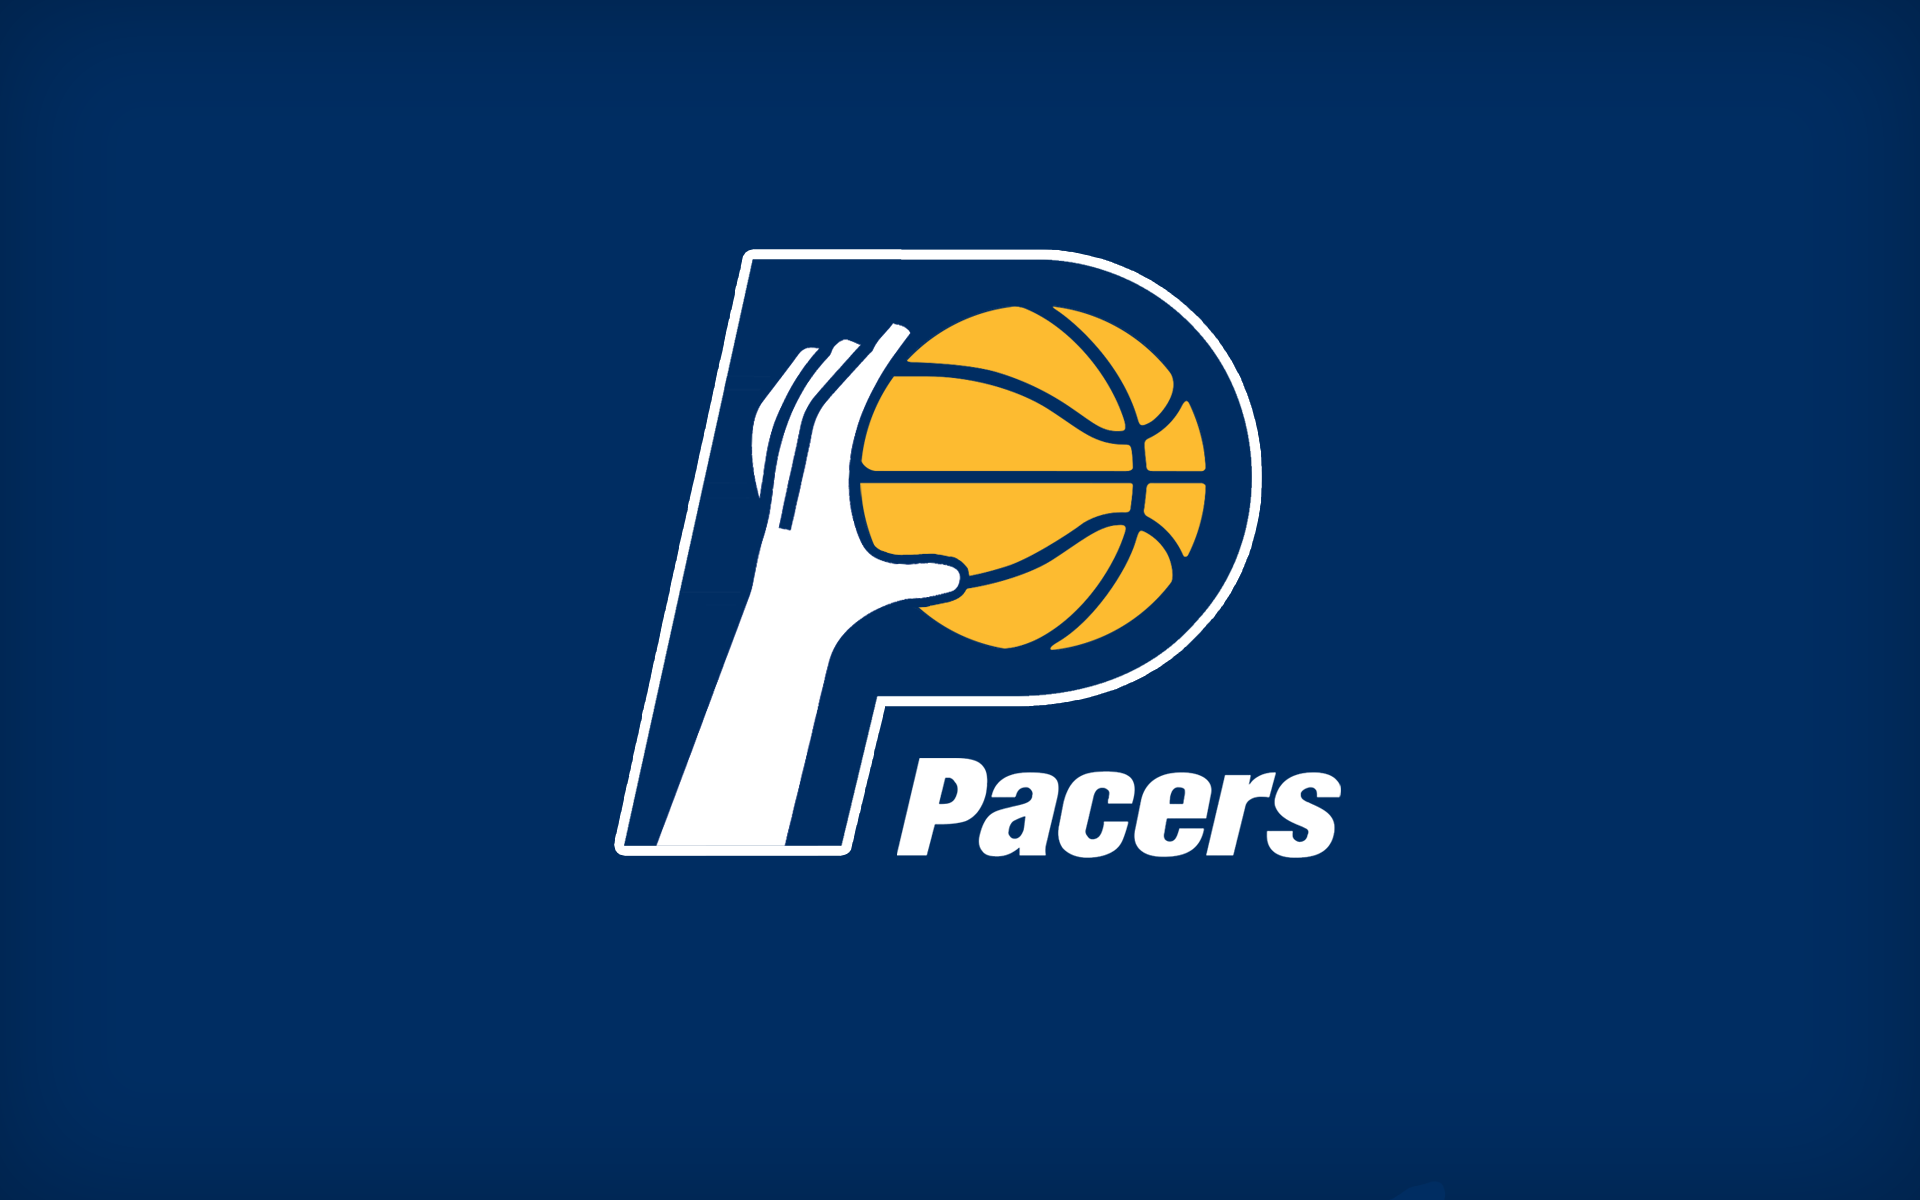 Redesigning NBA Team Logos with Elements of Old